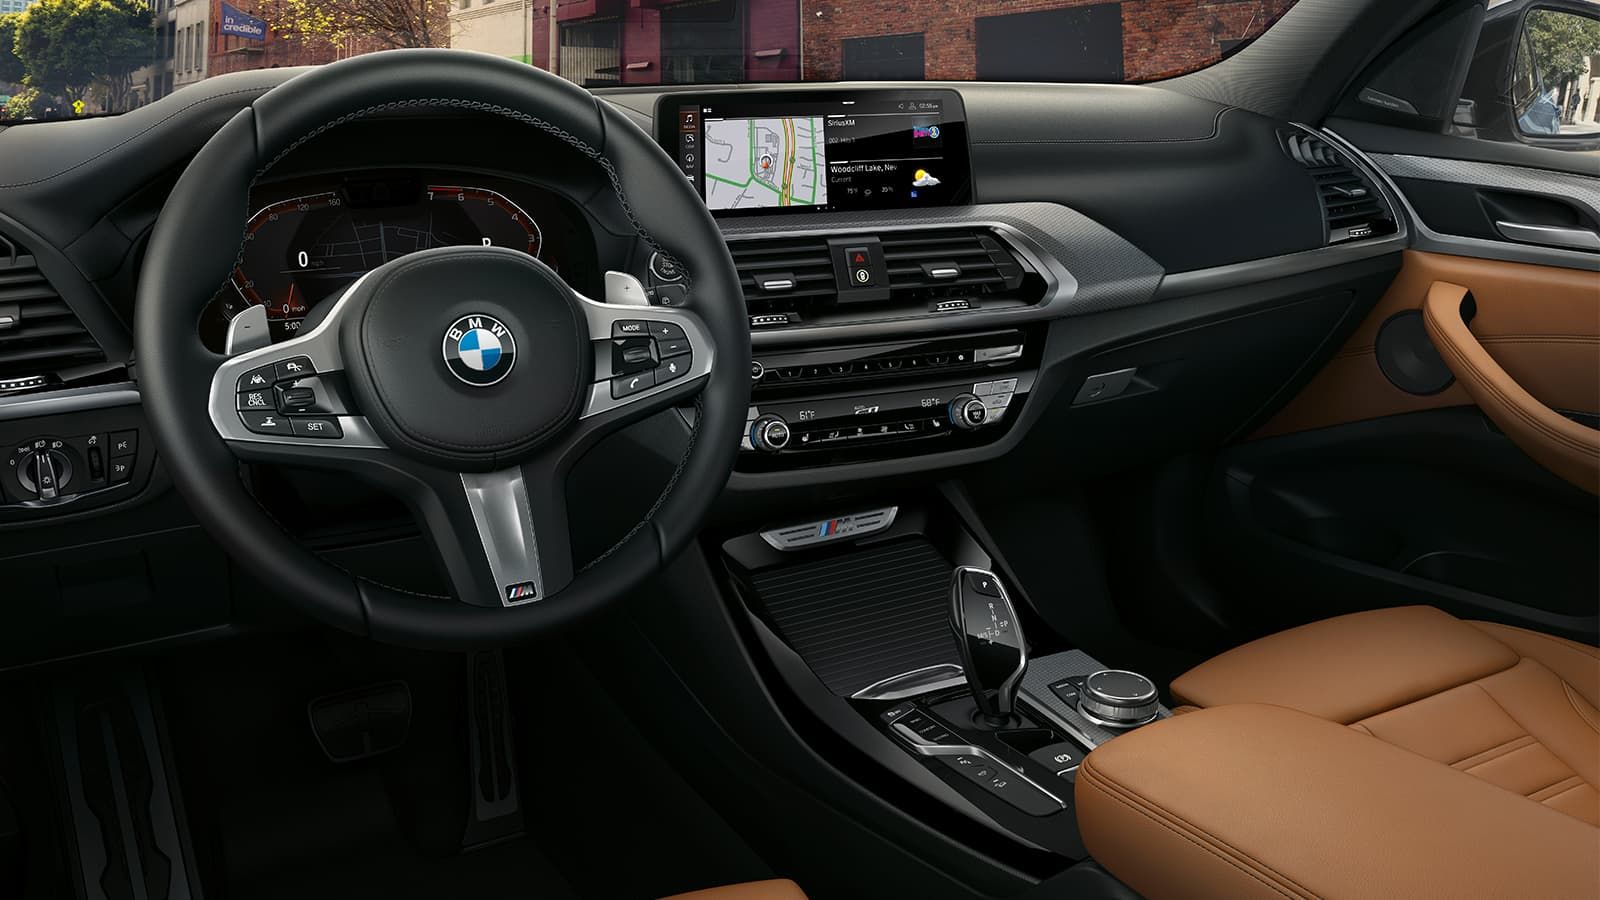 2020 BMW X3 Review, Pricing, & Pictures